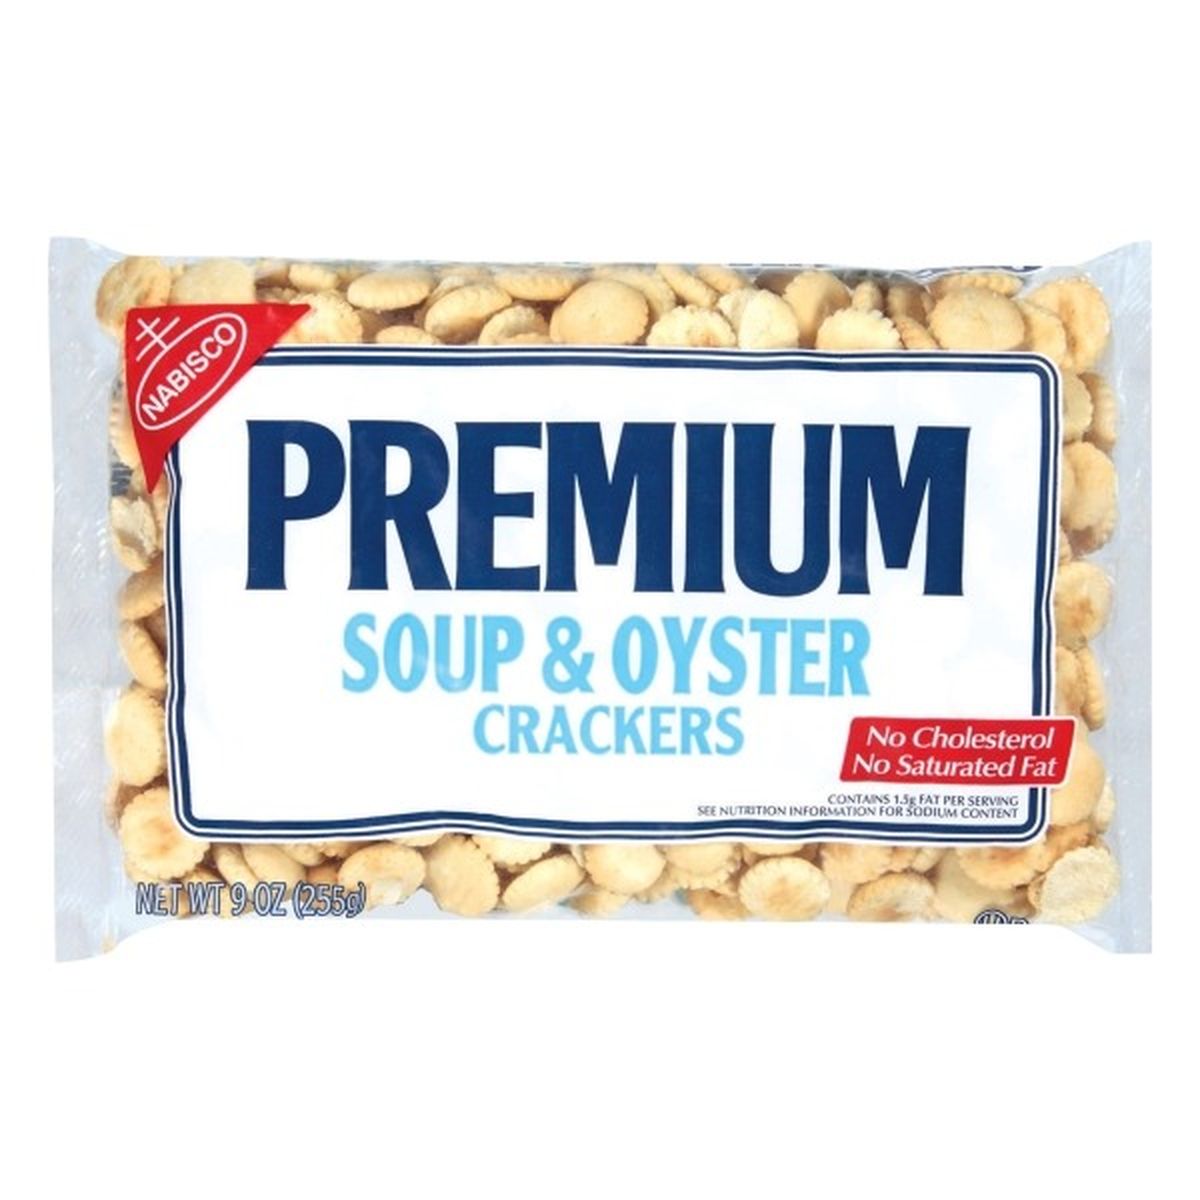 Calories in Premium Crackers, Soup & Oyster